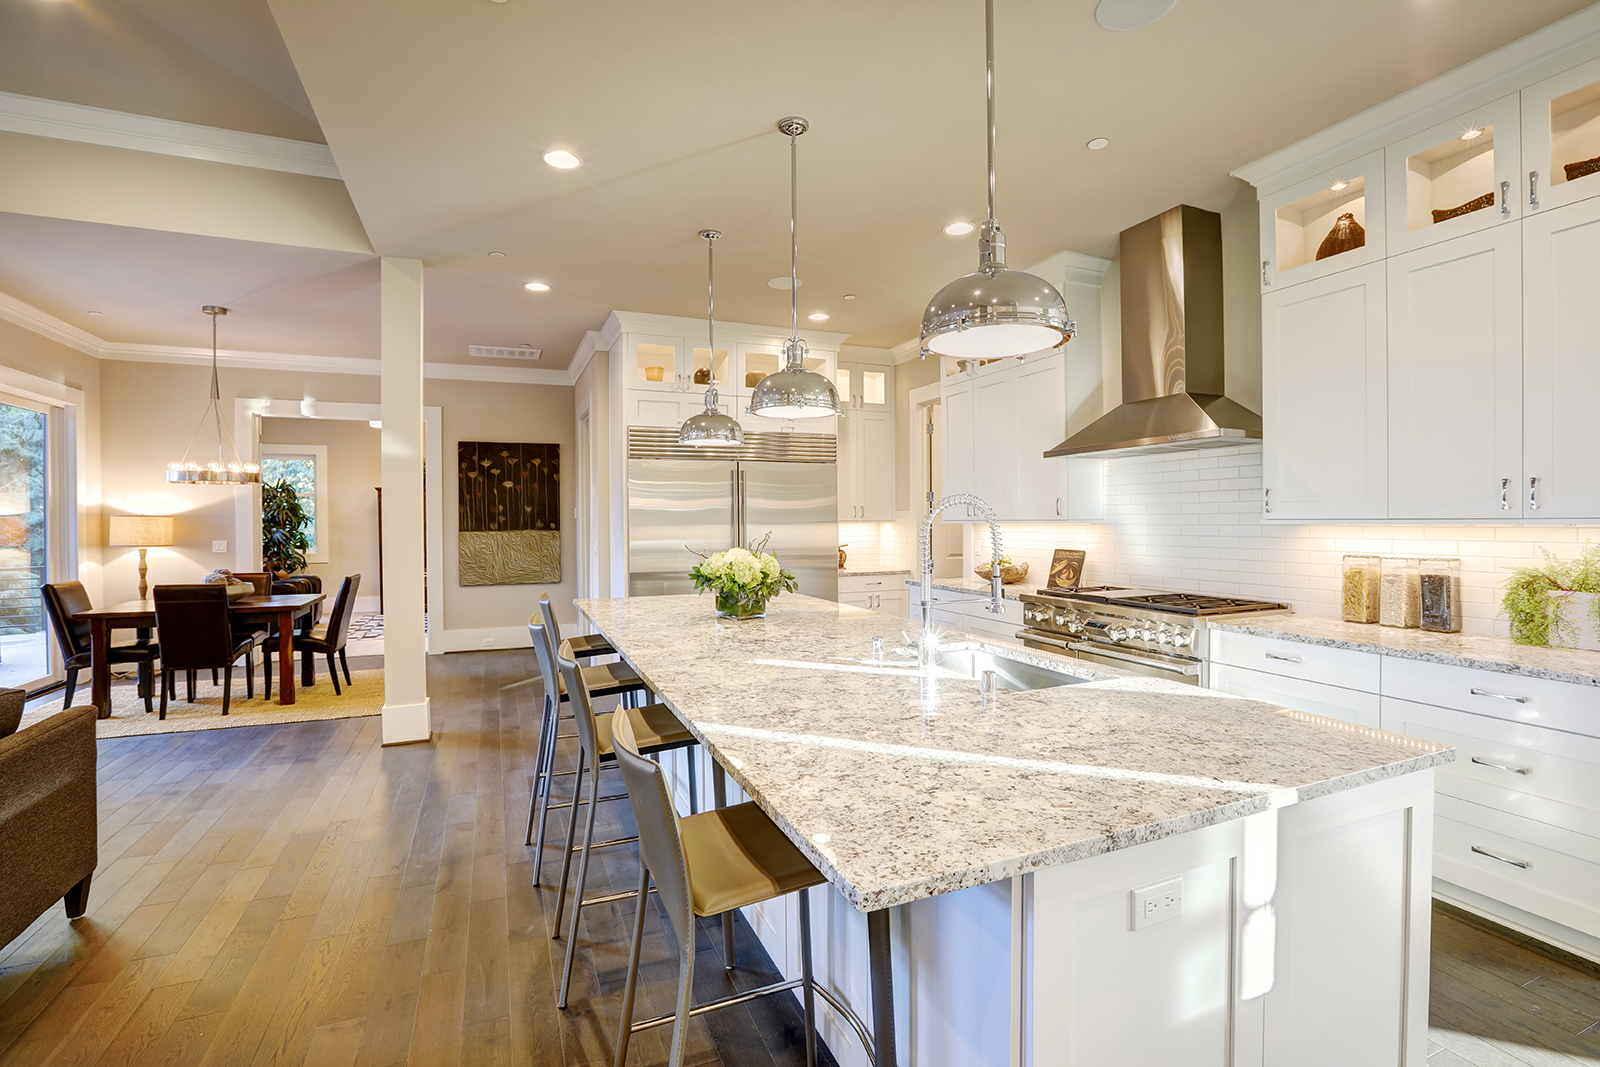 Kitchen Cabinet Designs – Are You A Trend Leader Or Trend Follower?